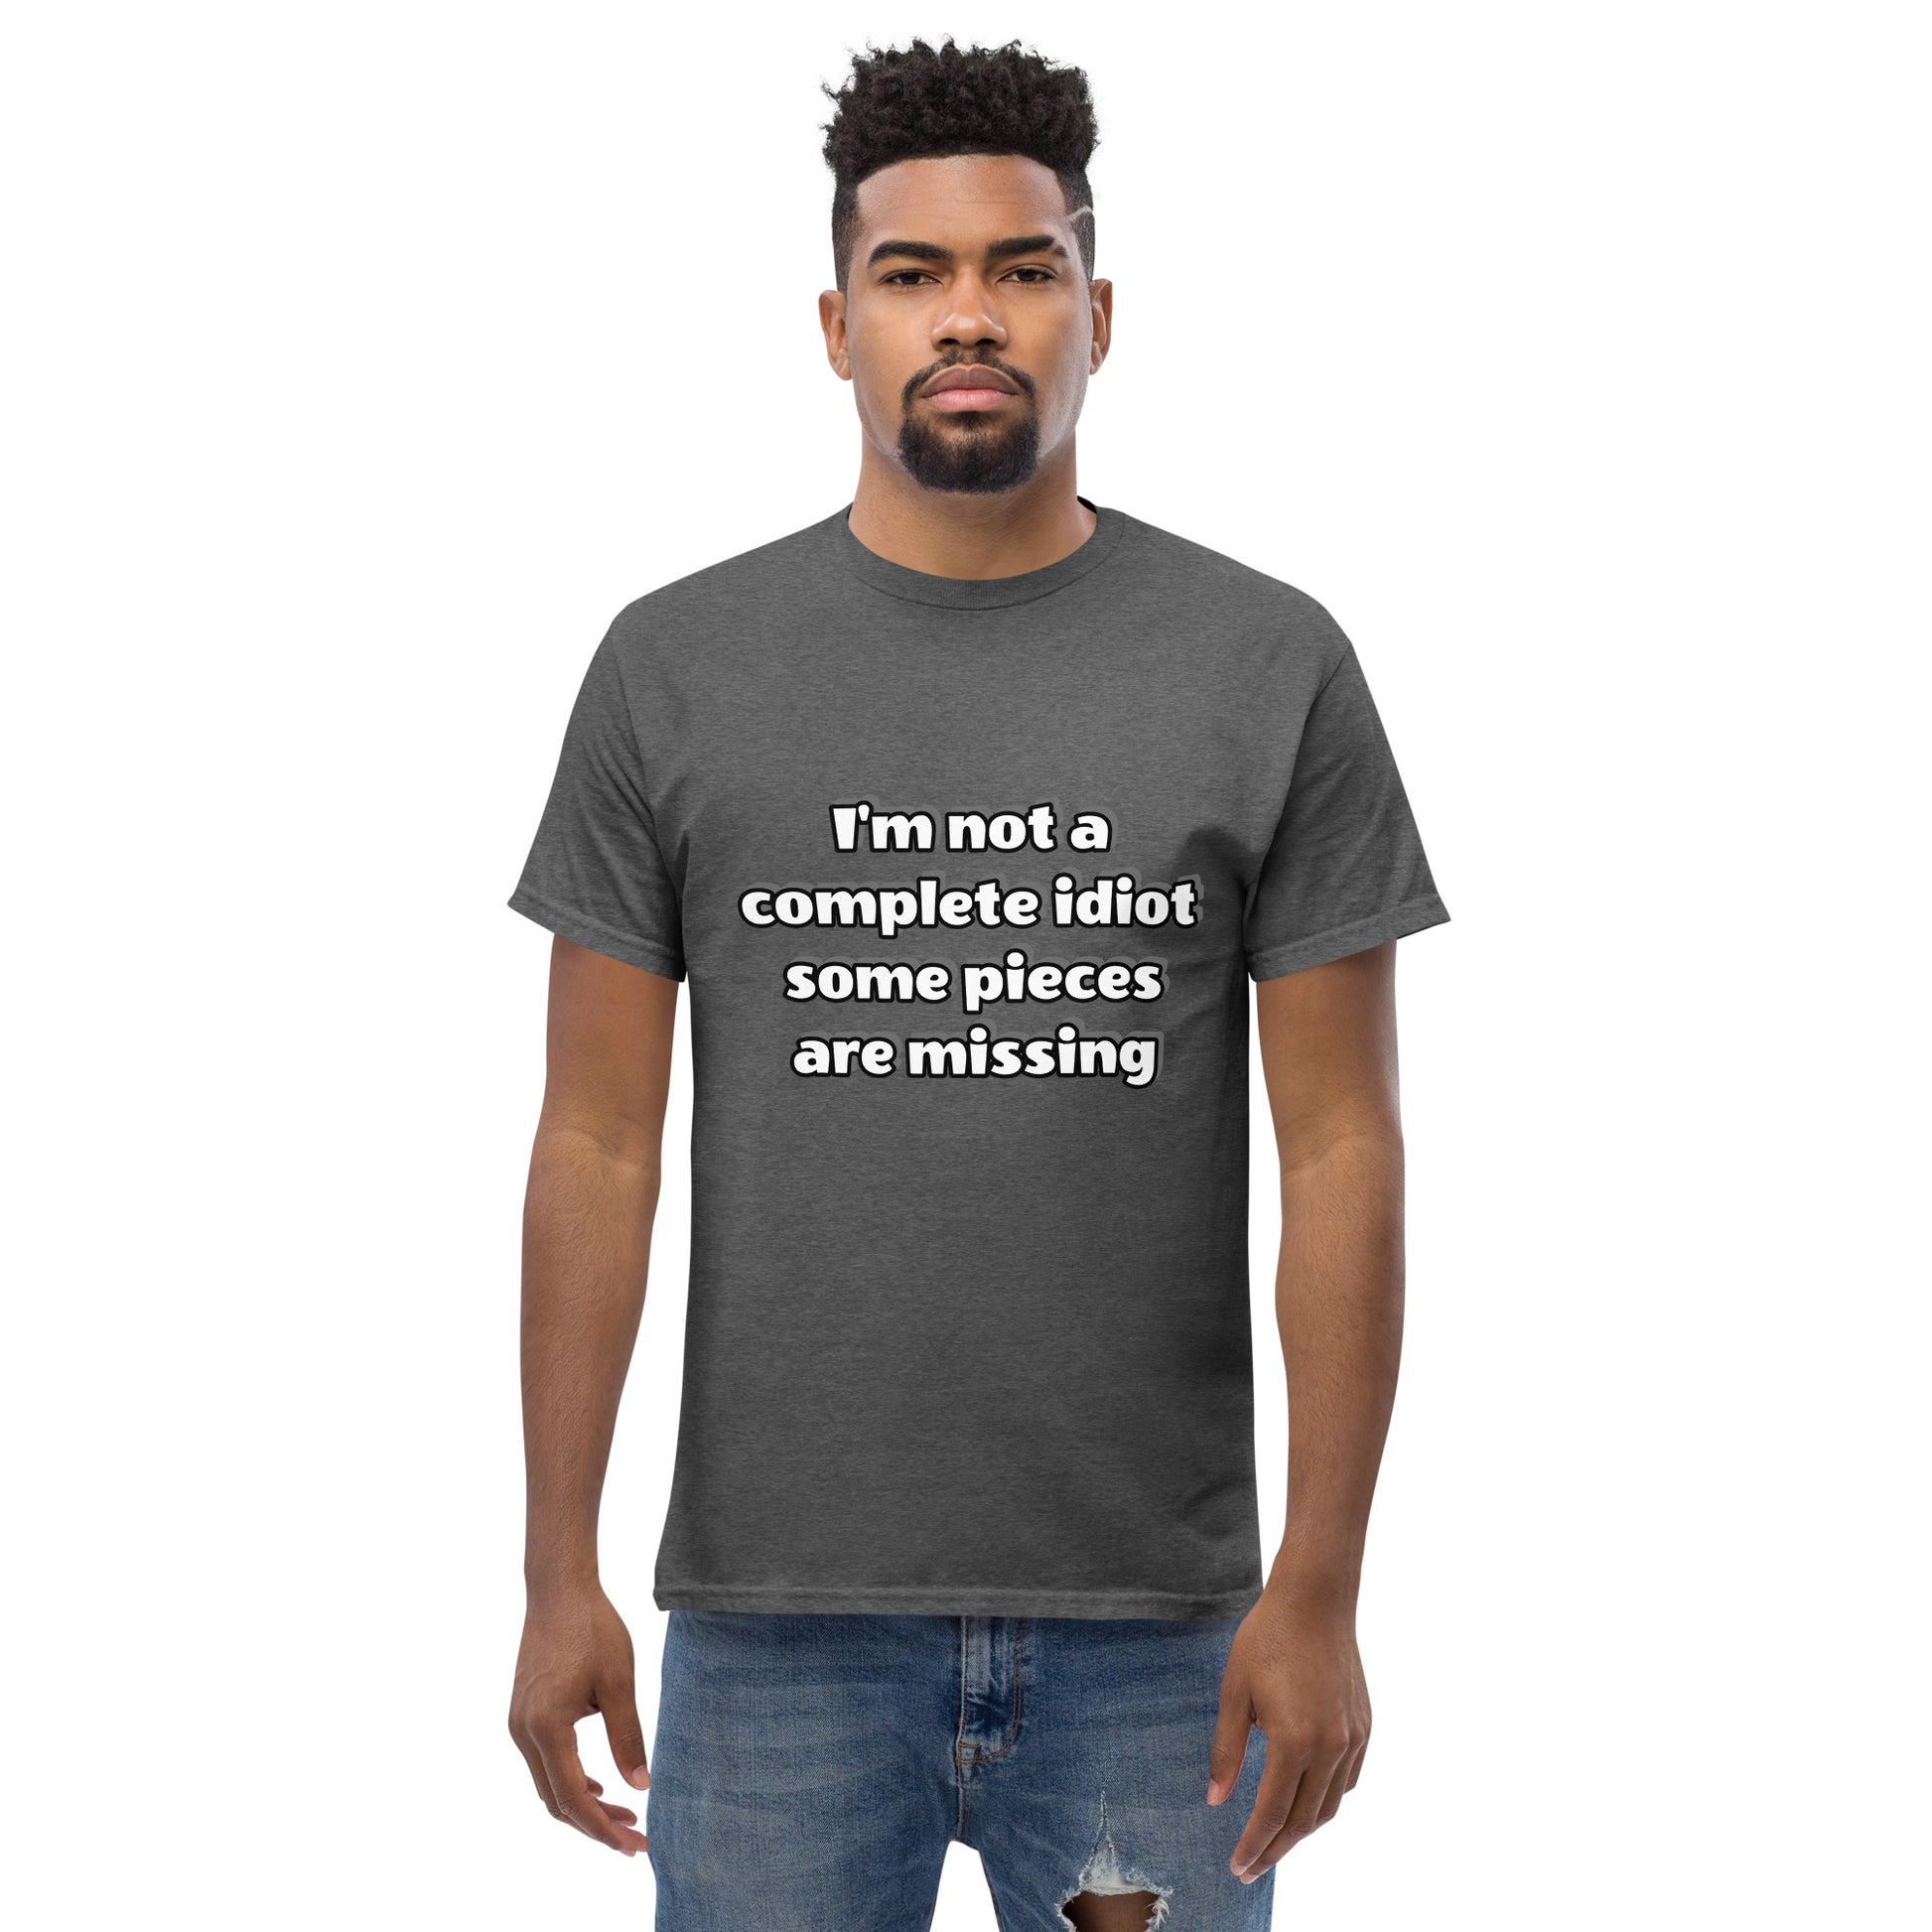 Men with gray t-shirt with text “I’m not a complete idiot, some pieces are missing”